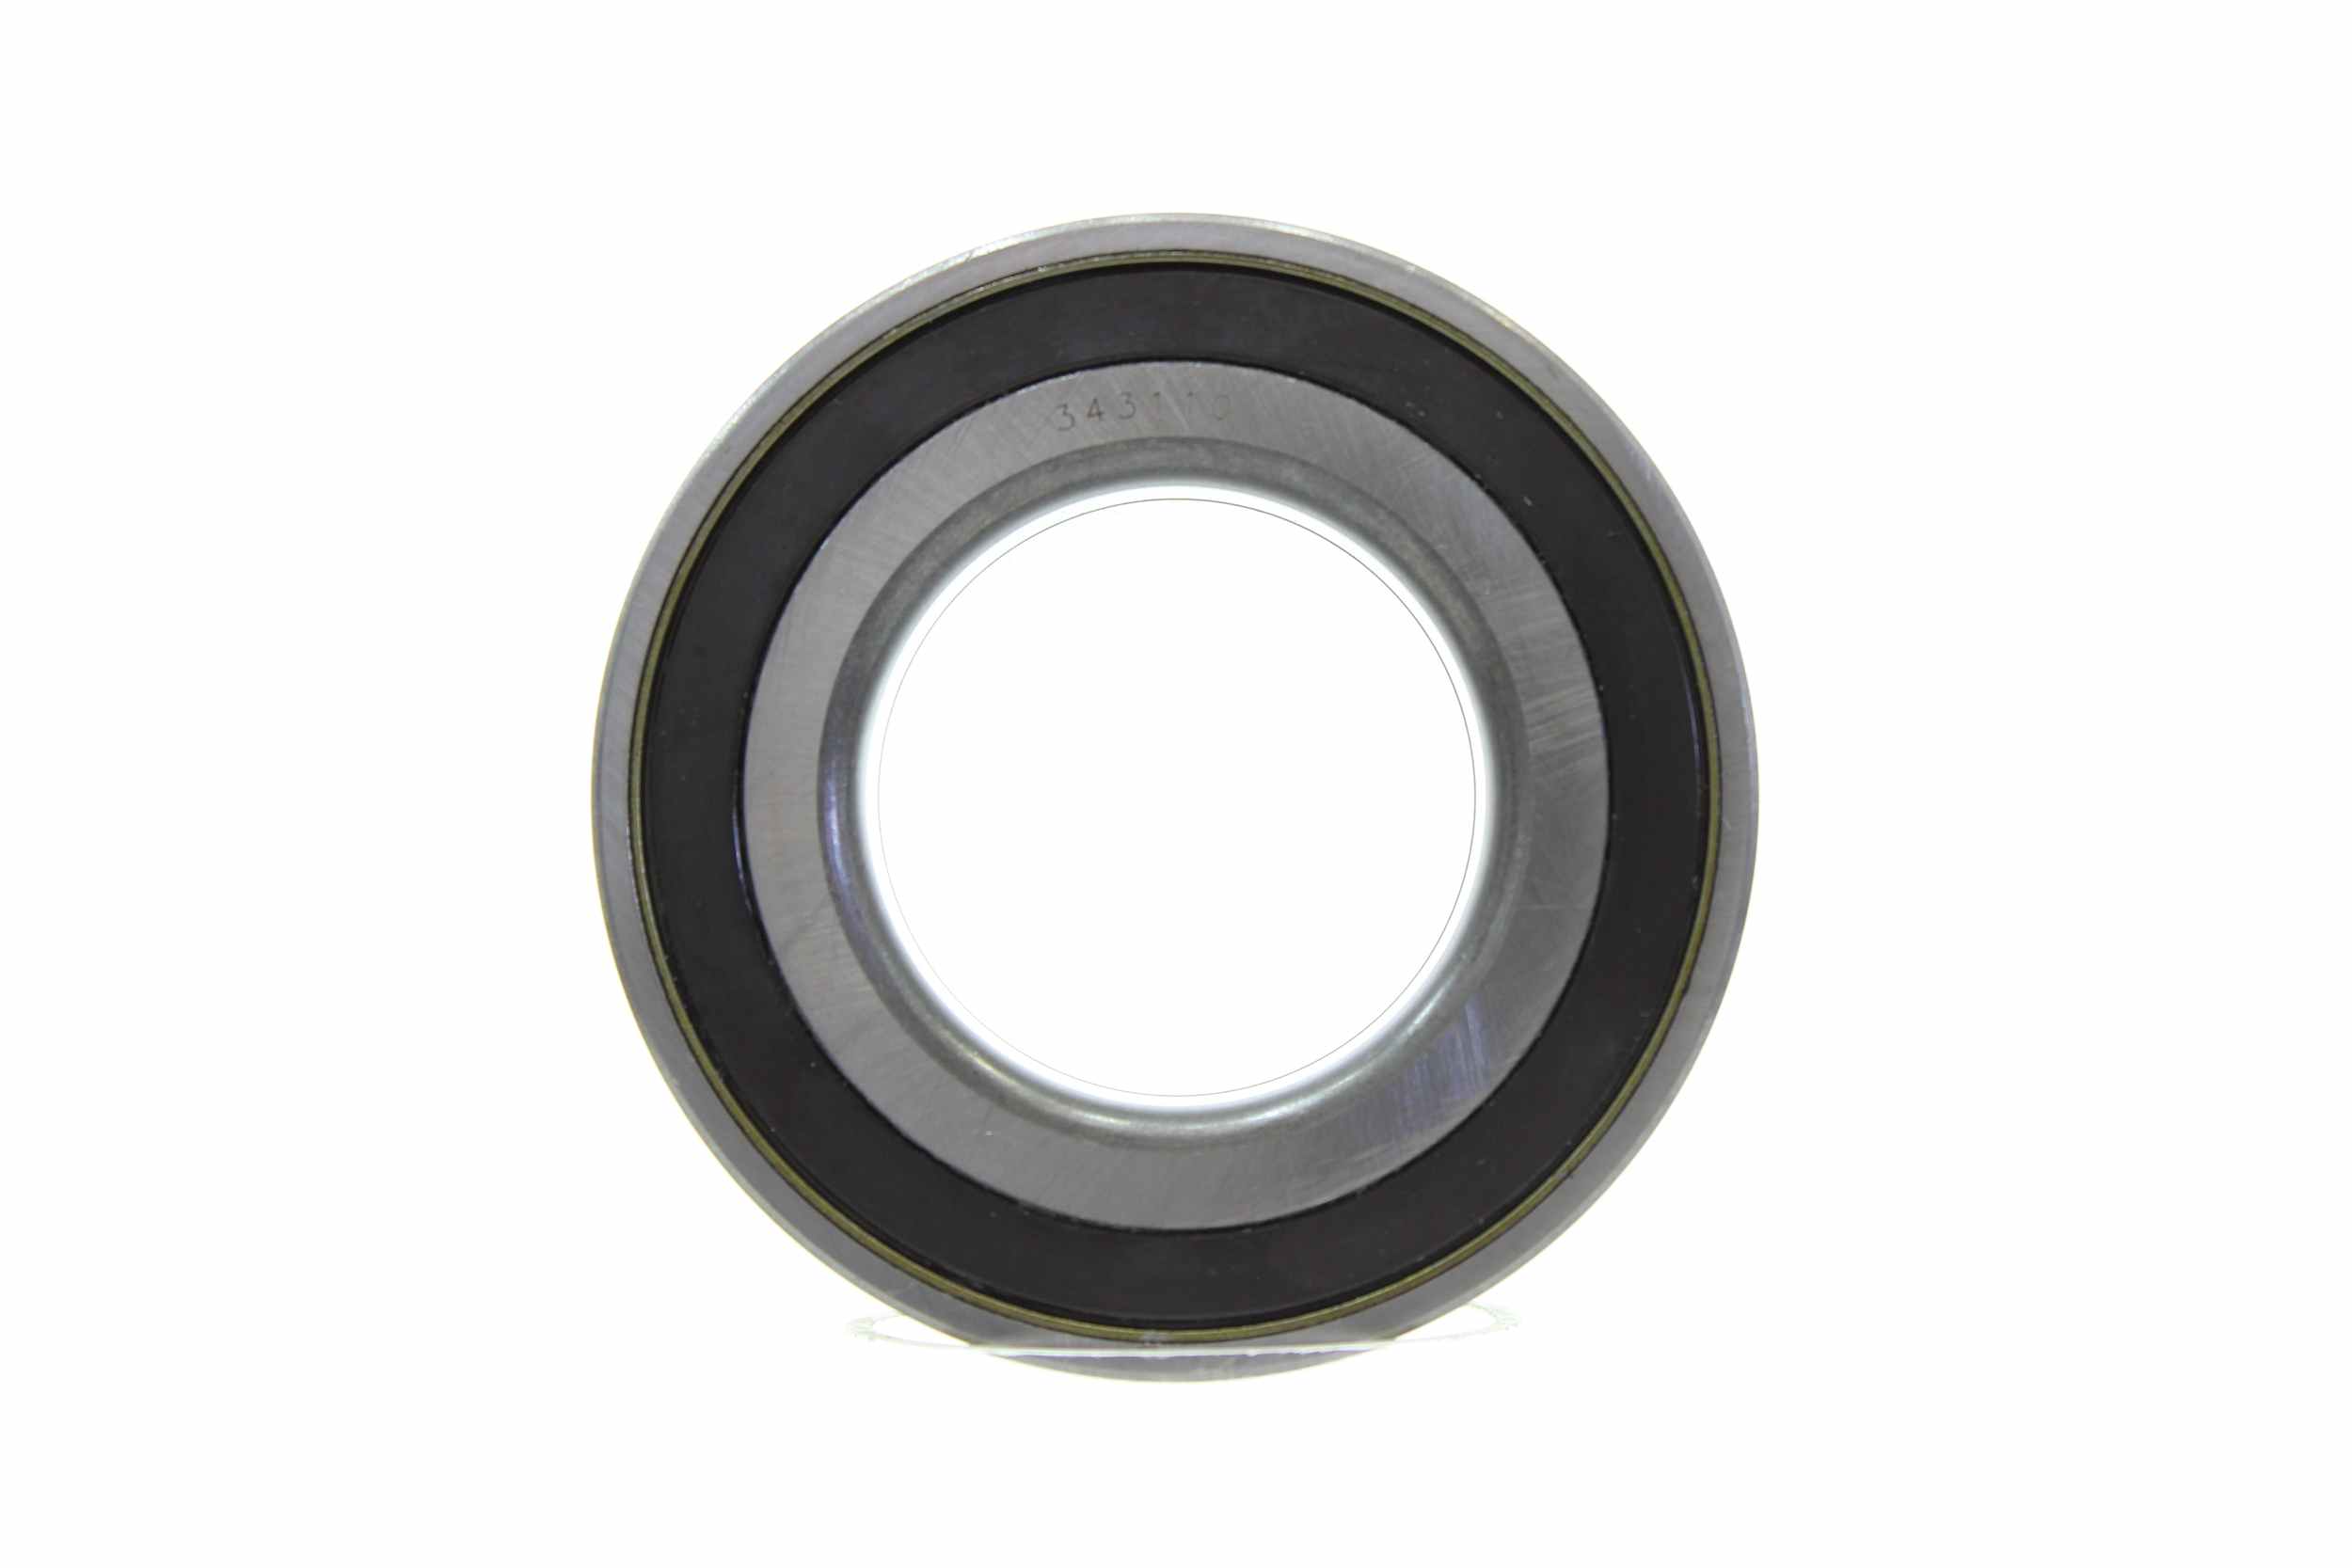 ALANKO 10343110 Wheel bearing kit Front axle both sides, with integrated magnetic sensor ring, 85 mm